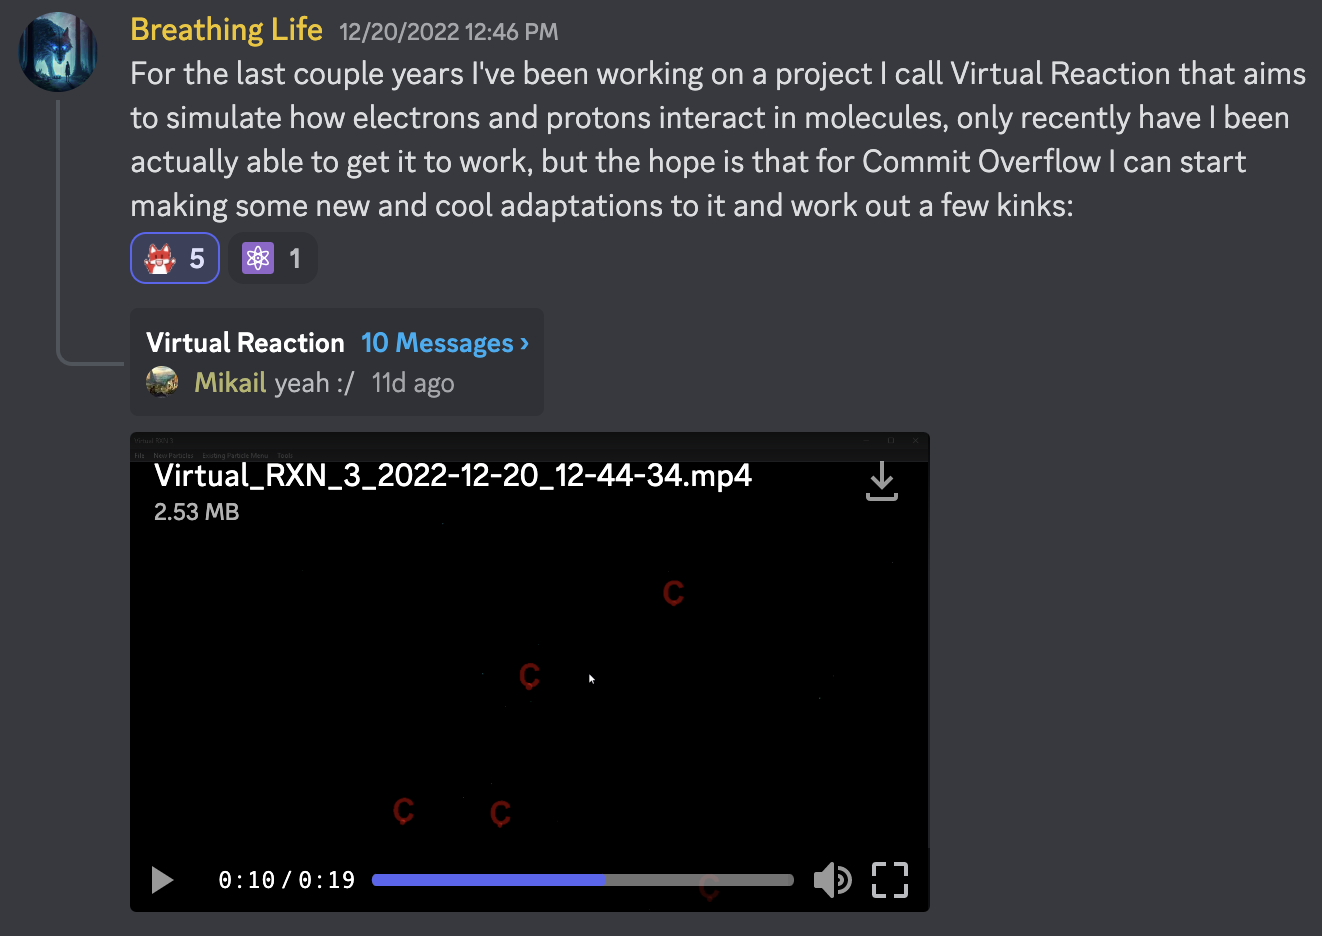 A message on Discord by user Breathing Life sharing their intention to work on a program that simulates how electrons and protons interact in molecules